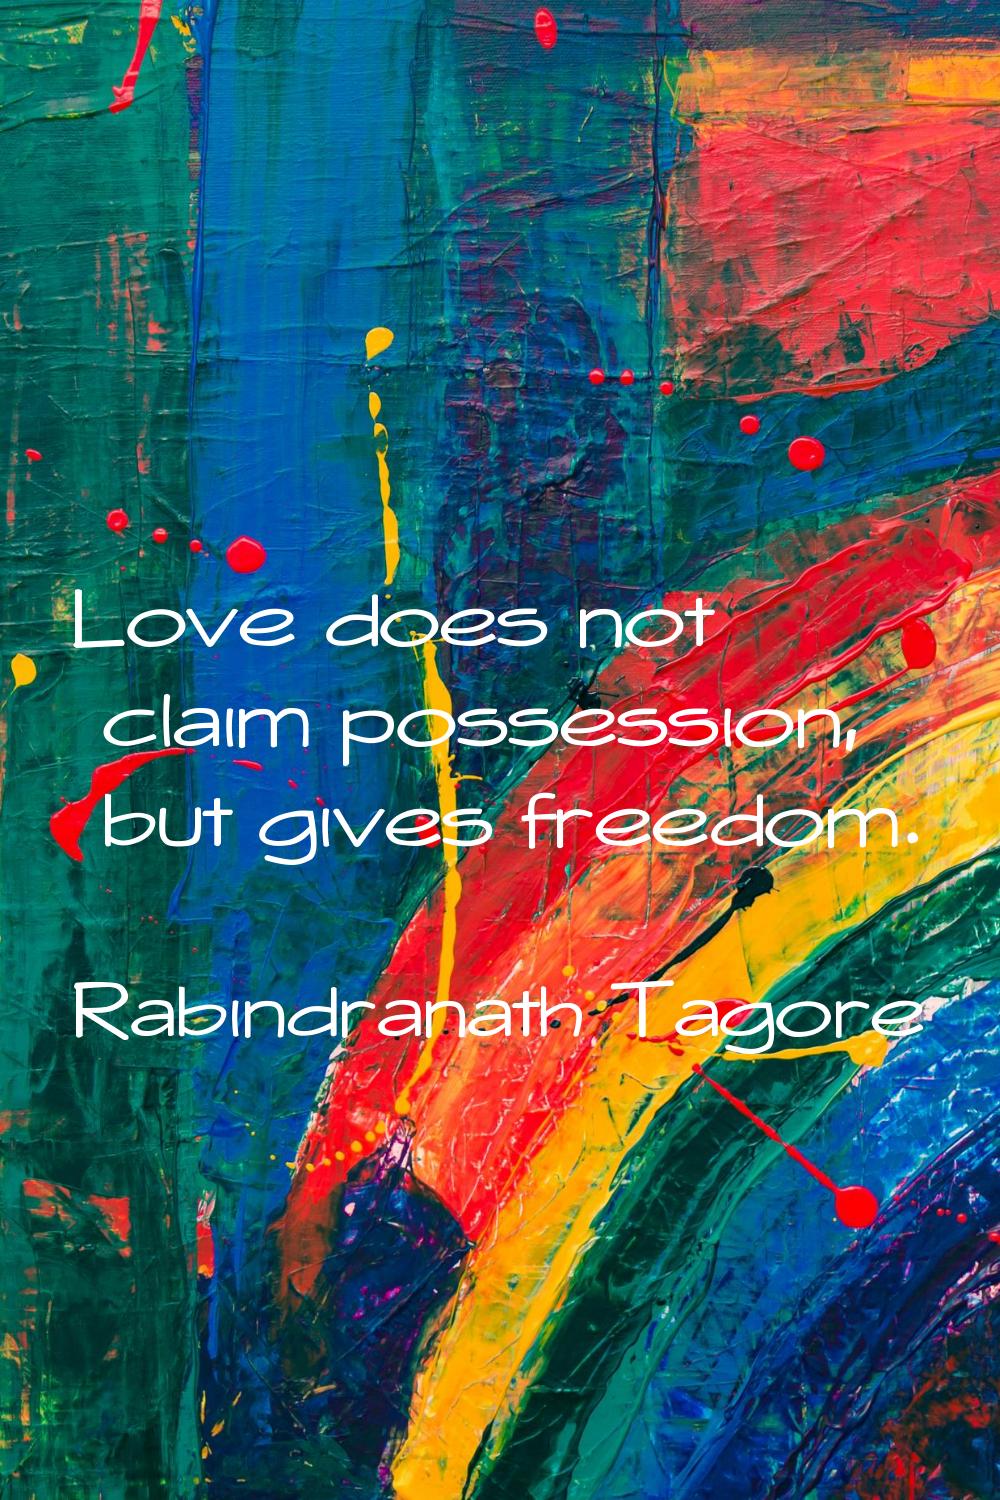 Love does not claim possession, but gives freedom.